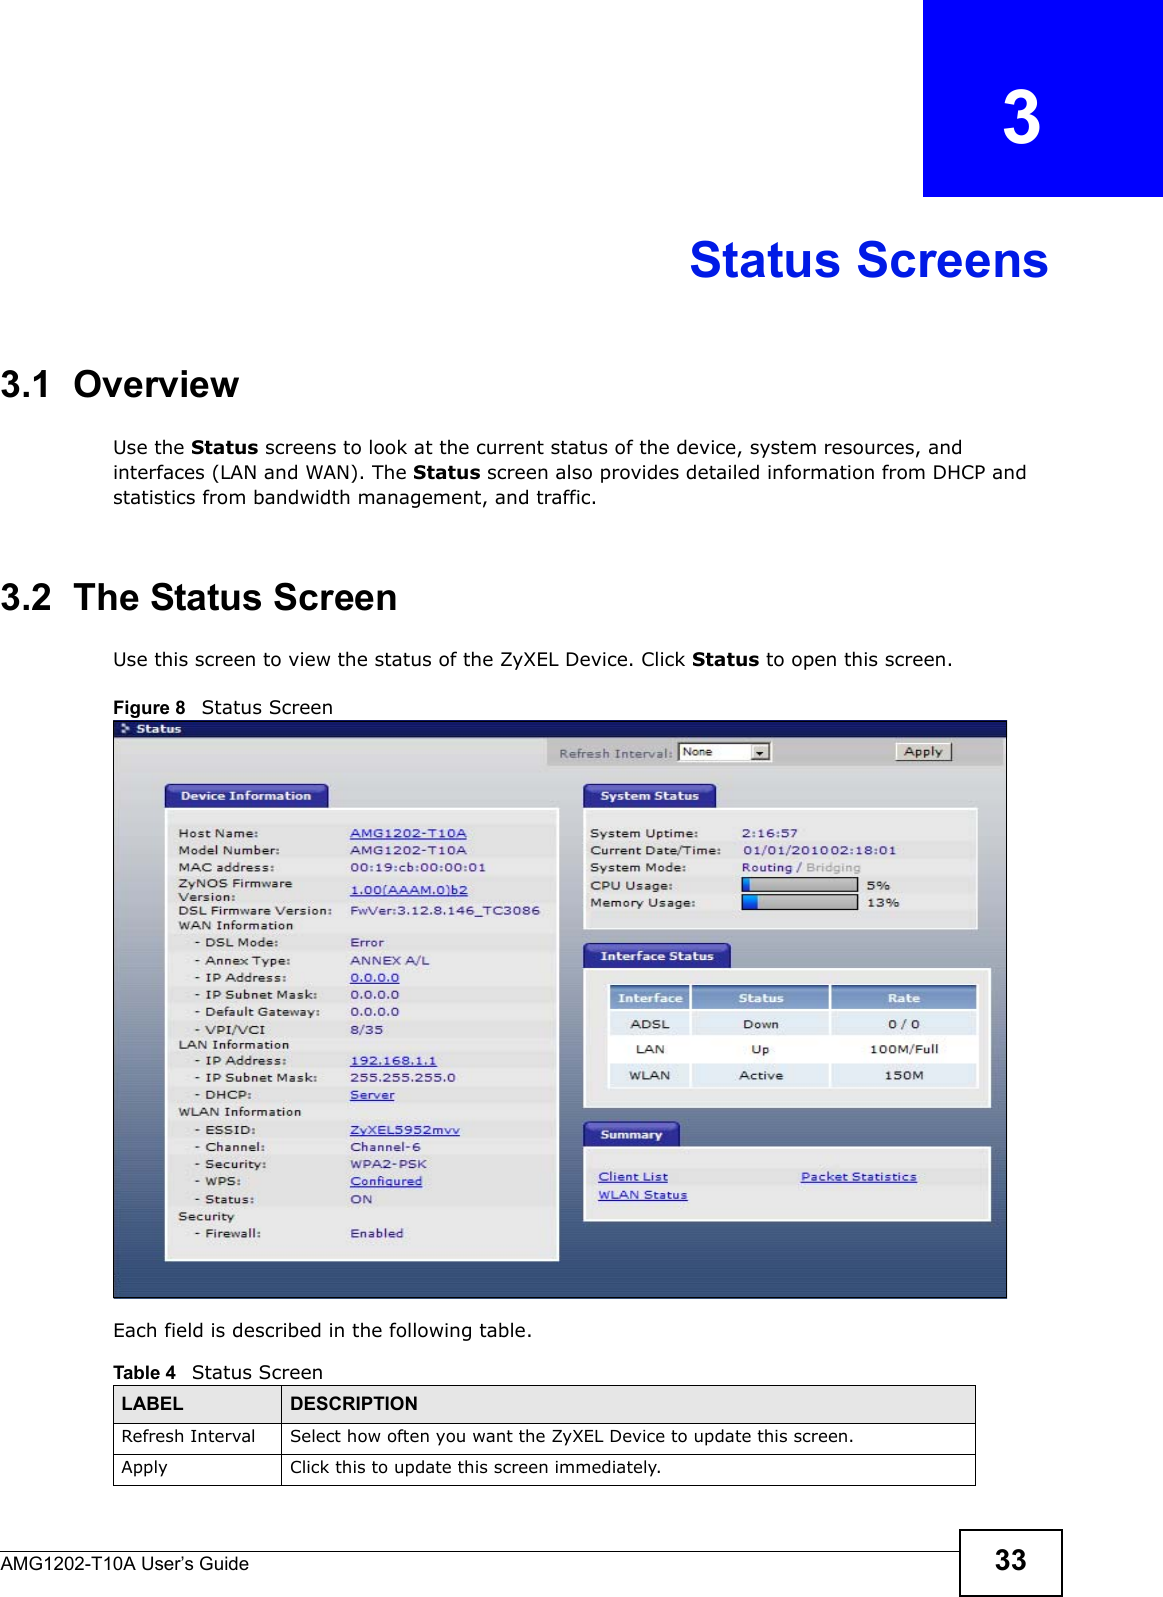 AMG1202-T10A User’s Guide 33CHAPTER   3Status Screens3.1  OverviewUse the Status screens to look at the current status of the device, system resources, and interfaces (LAN and WAN). The Status screen also provides detailed information from DHCP and statistics from bandwidth management, and traffic.3.2  The Status Screen Use this screen to view the status of the ZyXEL Device. Click Status to open this screen.Figure 8   Status ScreenEach field is described in the following table.Table 4   Status ScreenLABEL DESCRIPTIONRefresh Interval Select how often you want the ZyXEL Device to update this screen.Apply Click this to update this screen immediately.